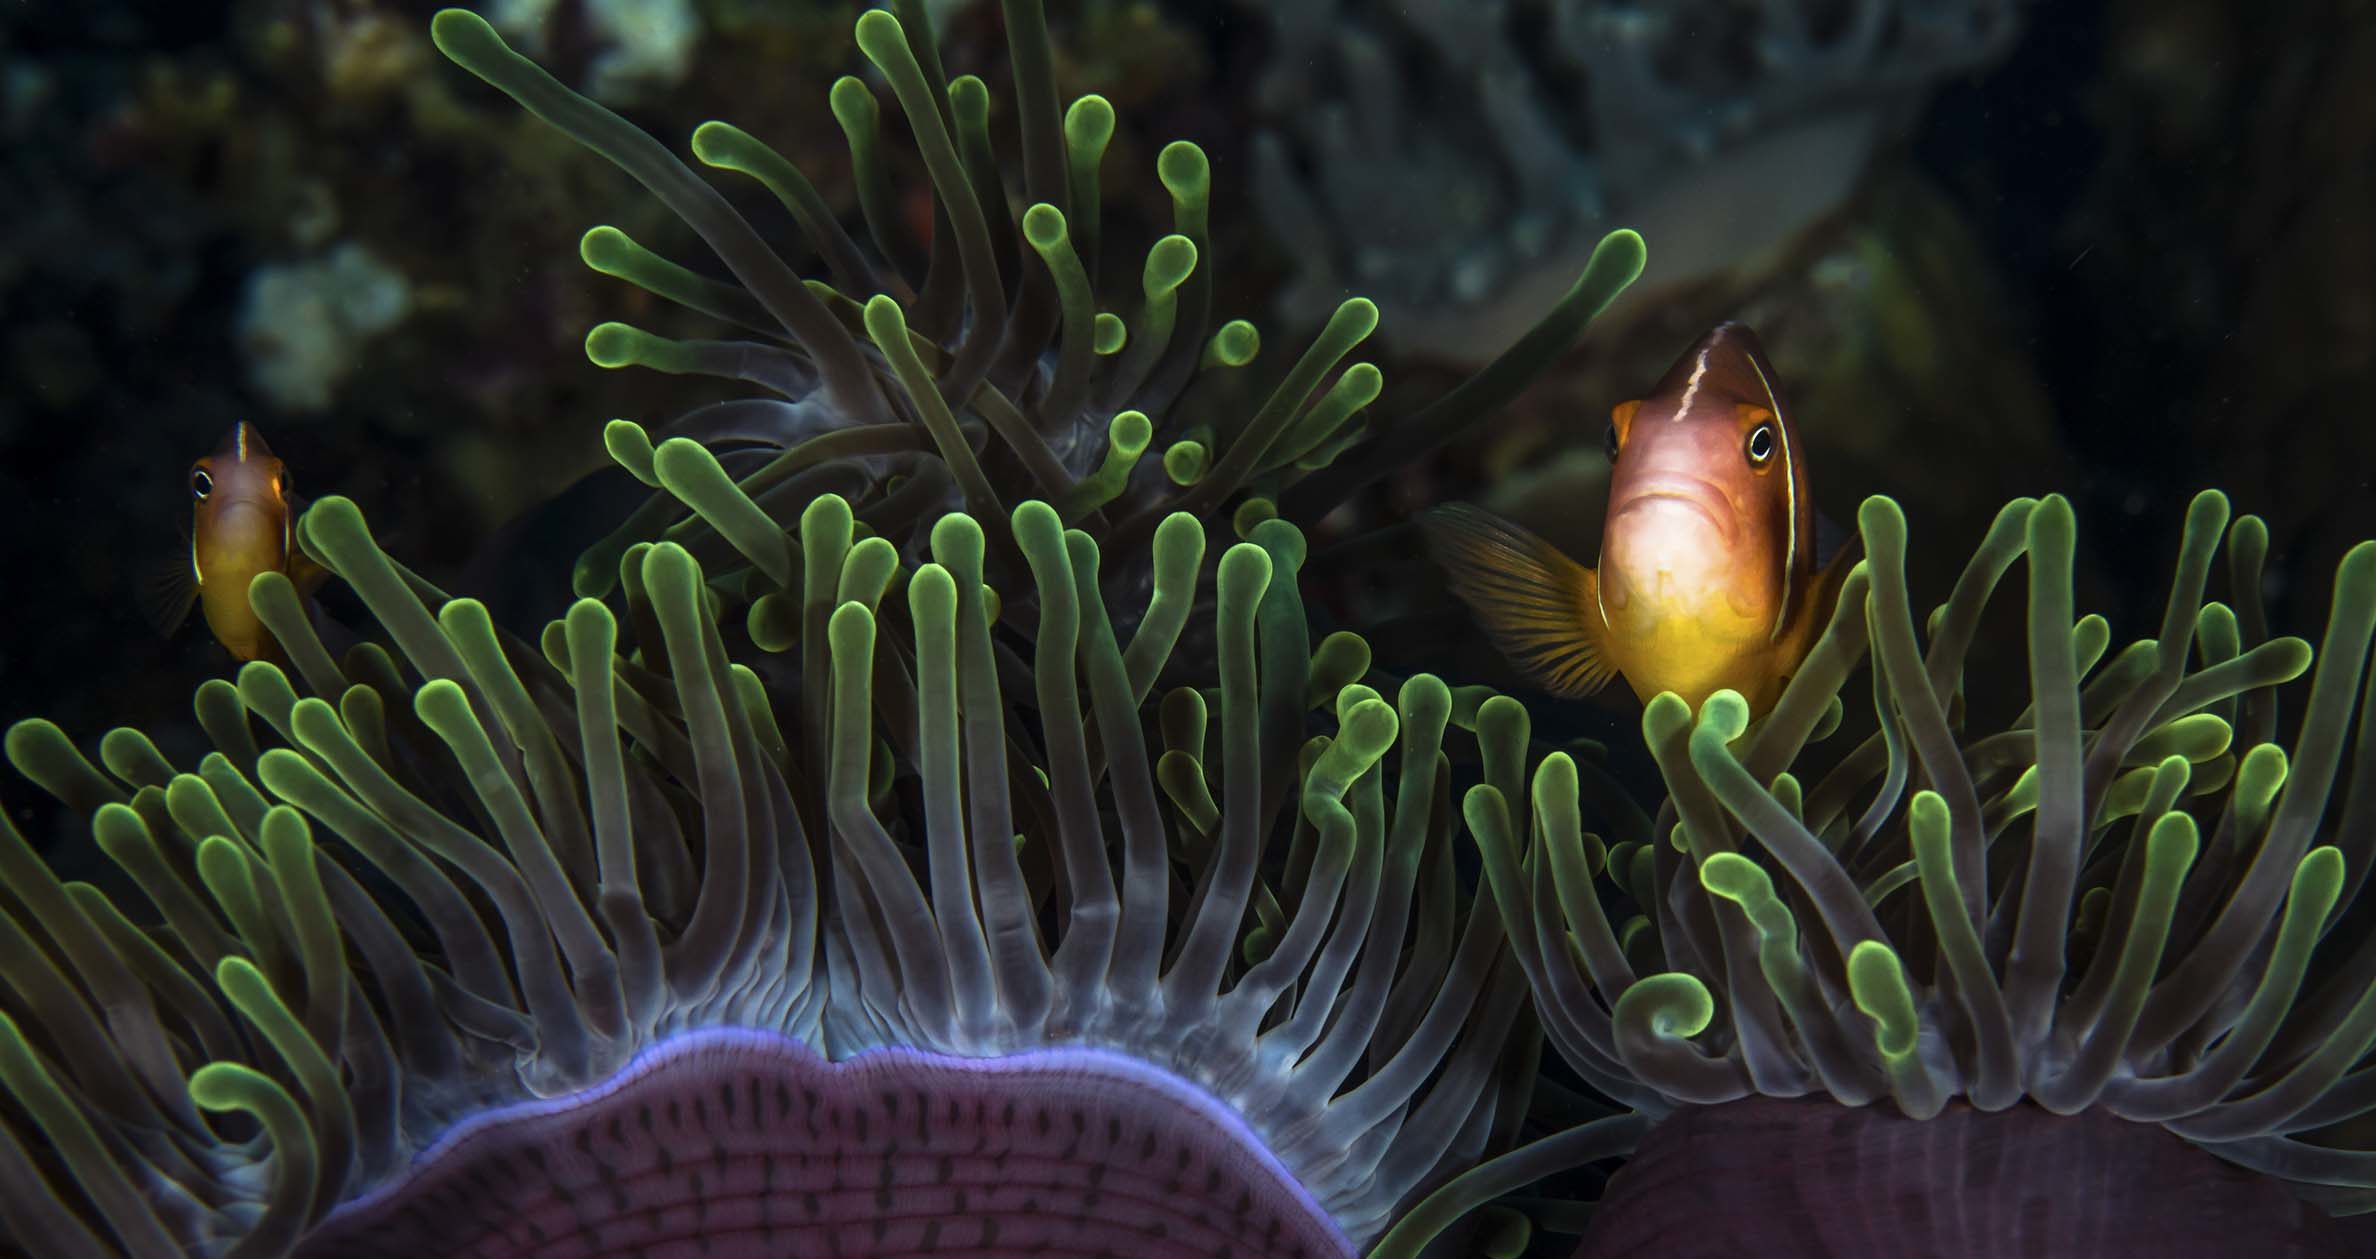 <p>Anemone fish among the protective tentacles of their anemone home. (Image: Philip Hamilton)</p>